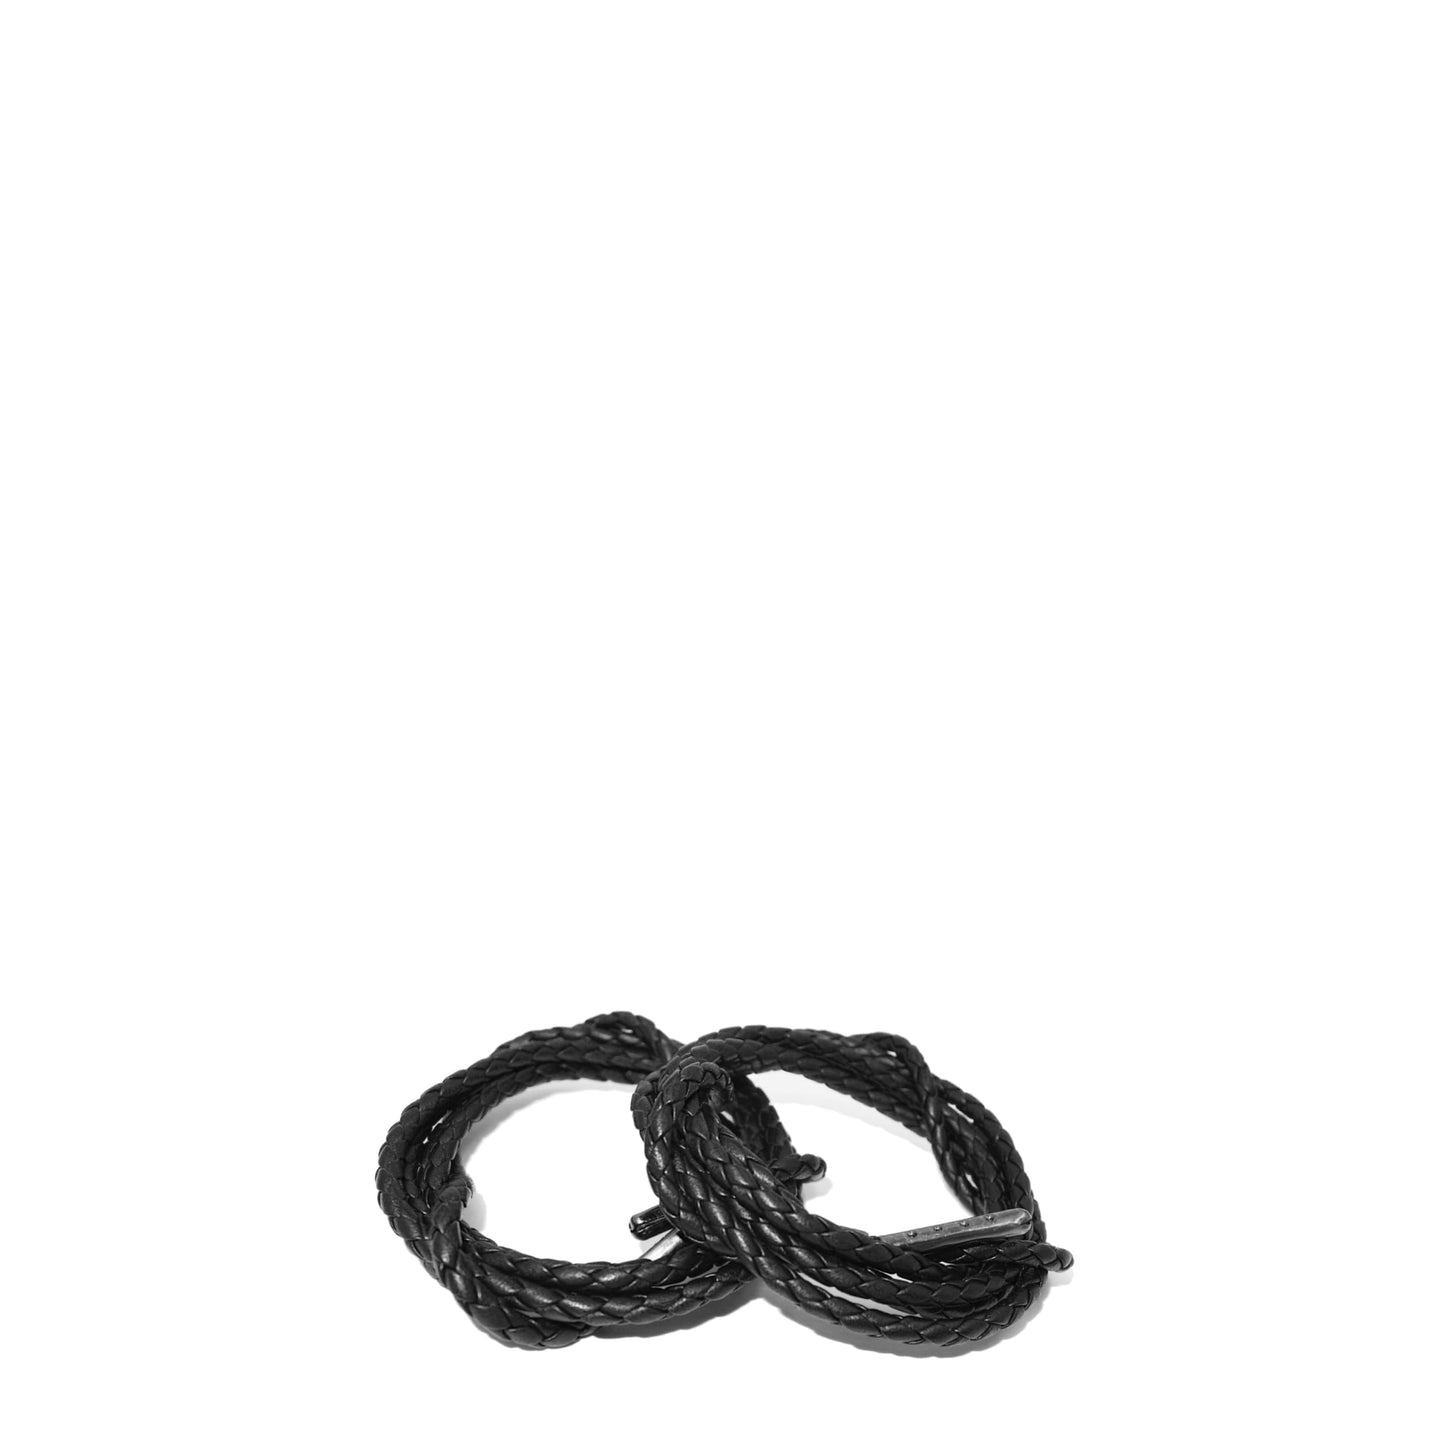 Braided Shoelaces - Black (shoelaces) - Accessories Made in USA | Made By Alex